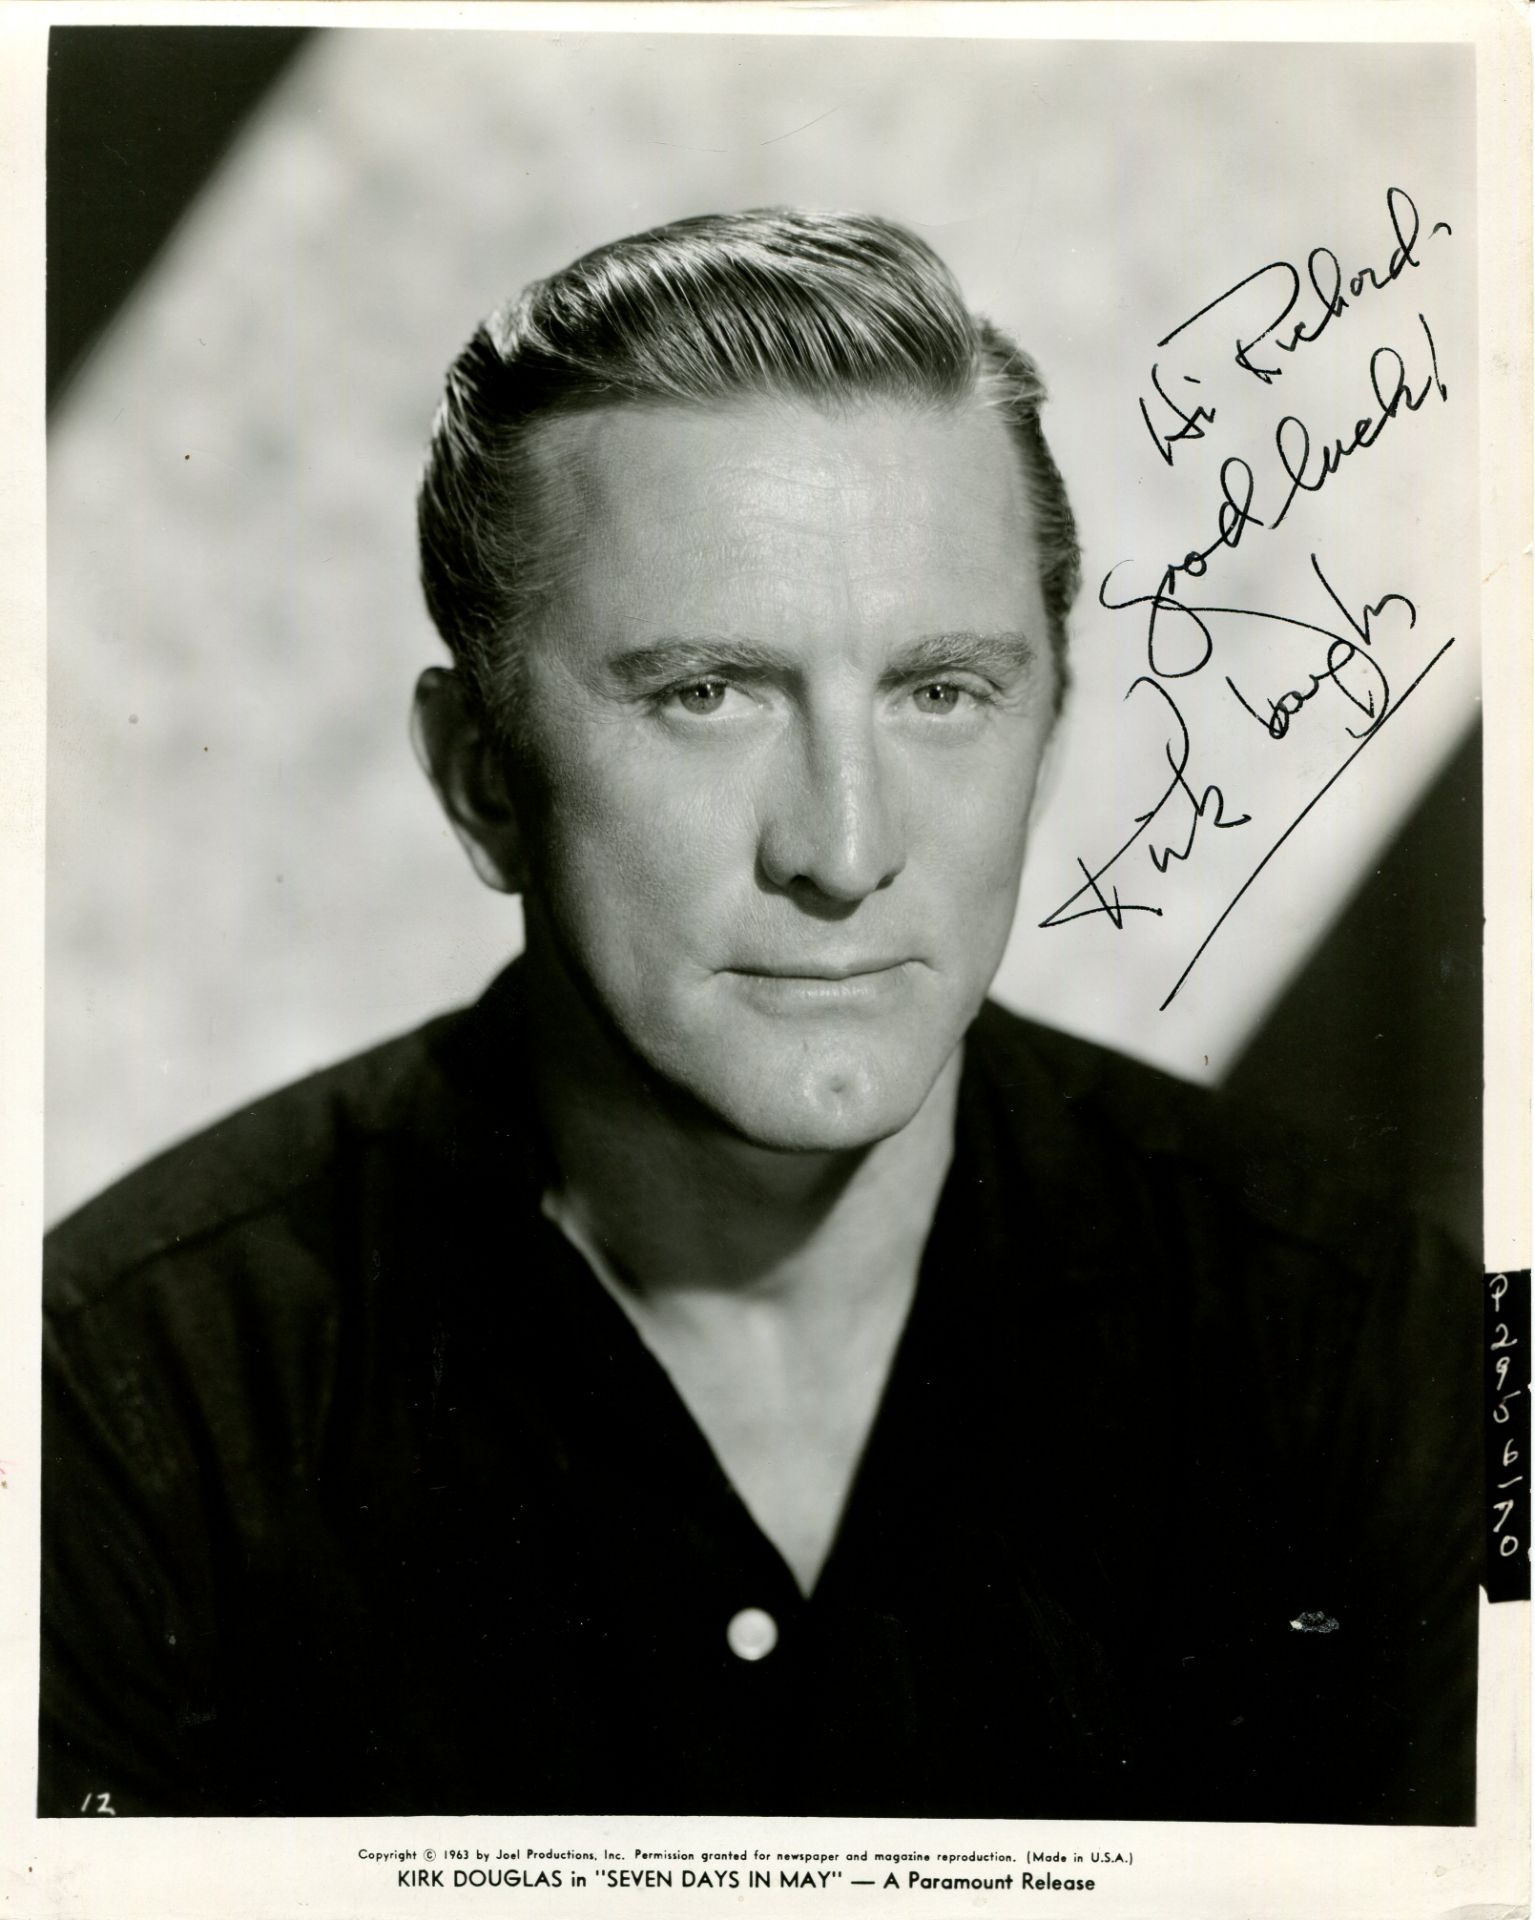 DOUGLAS KIRK: (1916-2020) American actor, the recipient of an Honorary Academy Award.